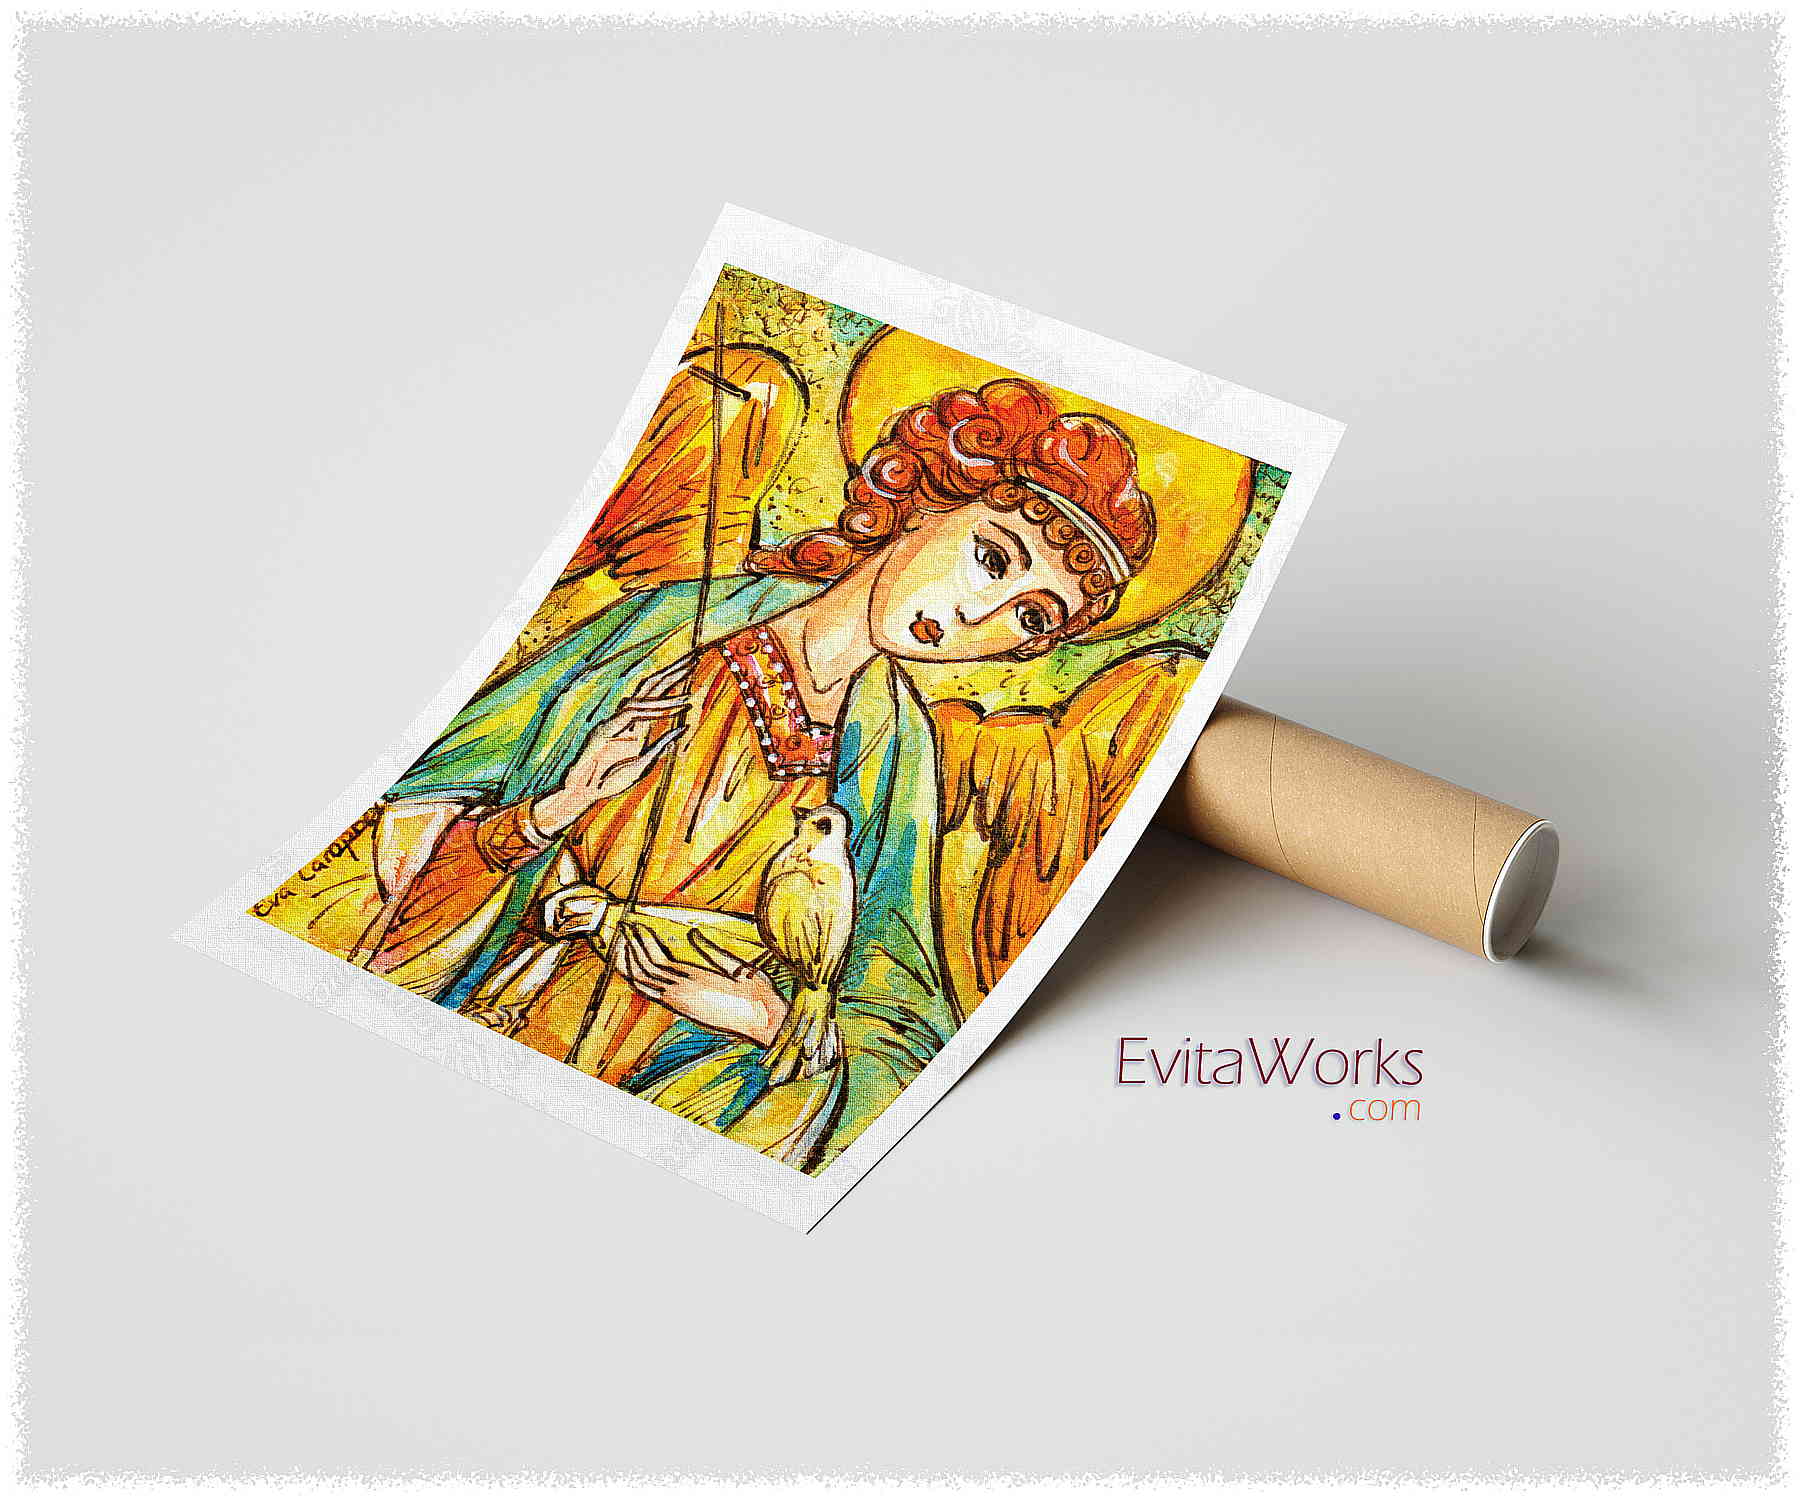 Hit to learn about "Angel 33, Christian art" on prints